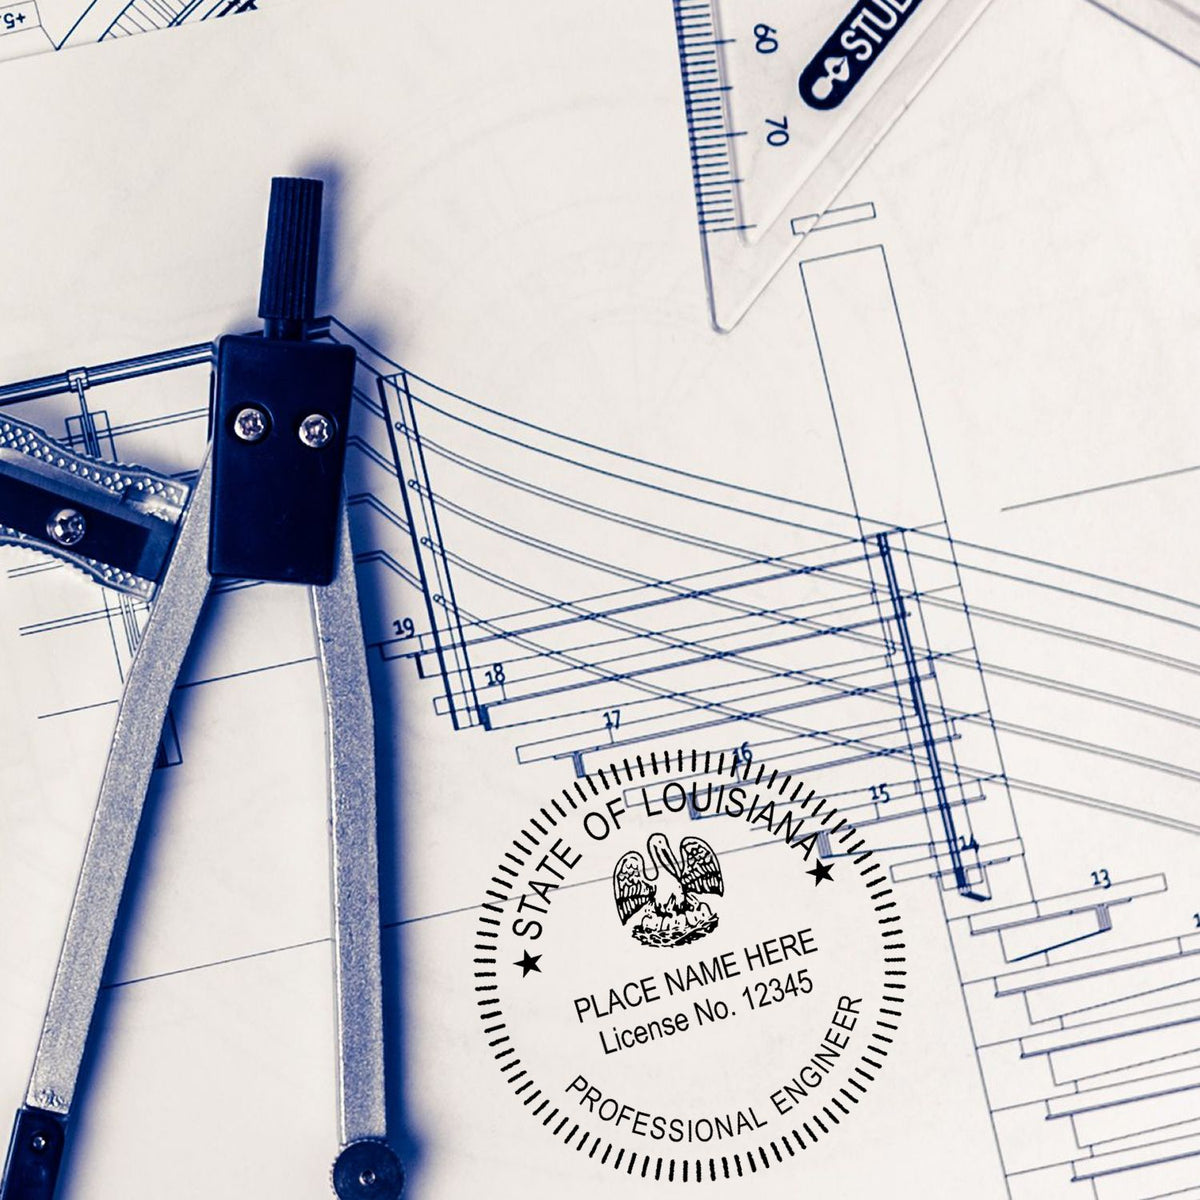 The Premium MaxLight Pre-Inked Louisiana Engineering Stamp stamp impression comes to life with a crisp, detailed photo on paper - showcasing true professional quality.